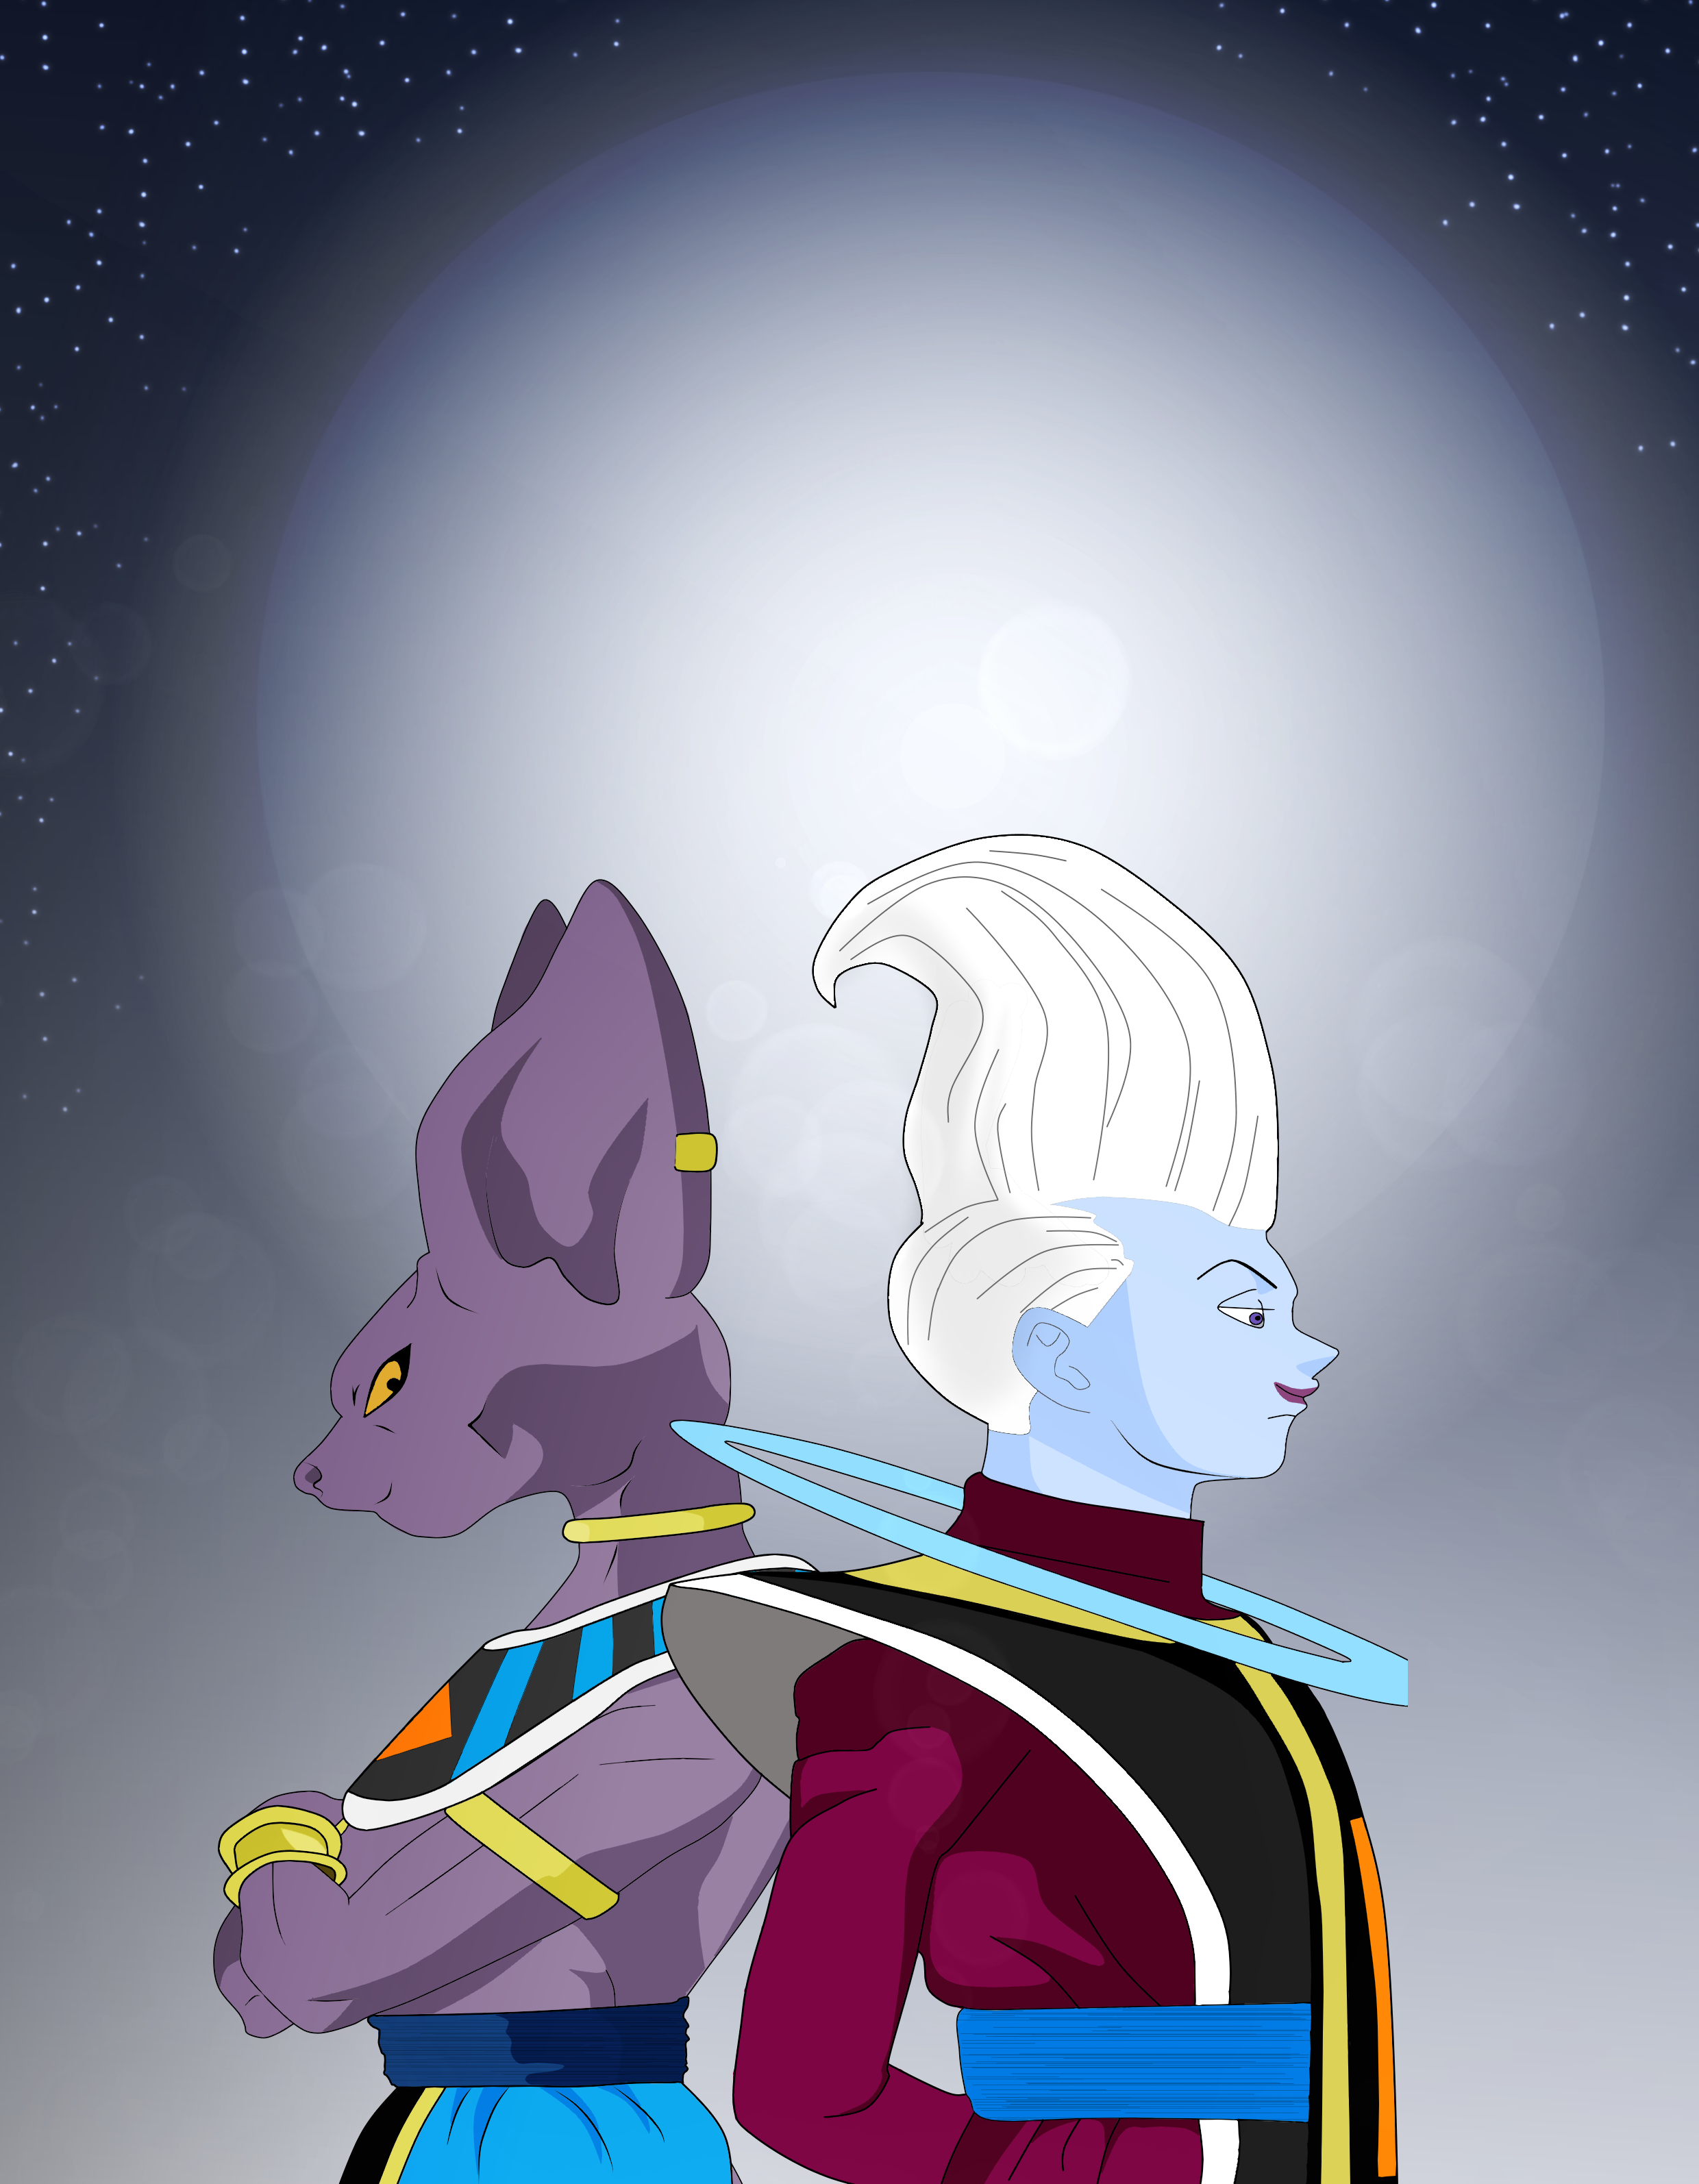 Whis and Beerus by Moncef23dz.